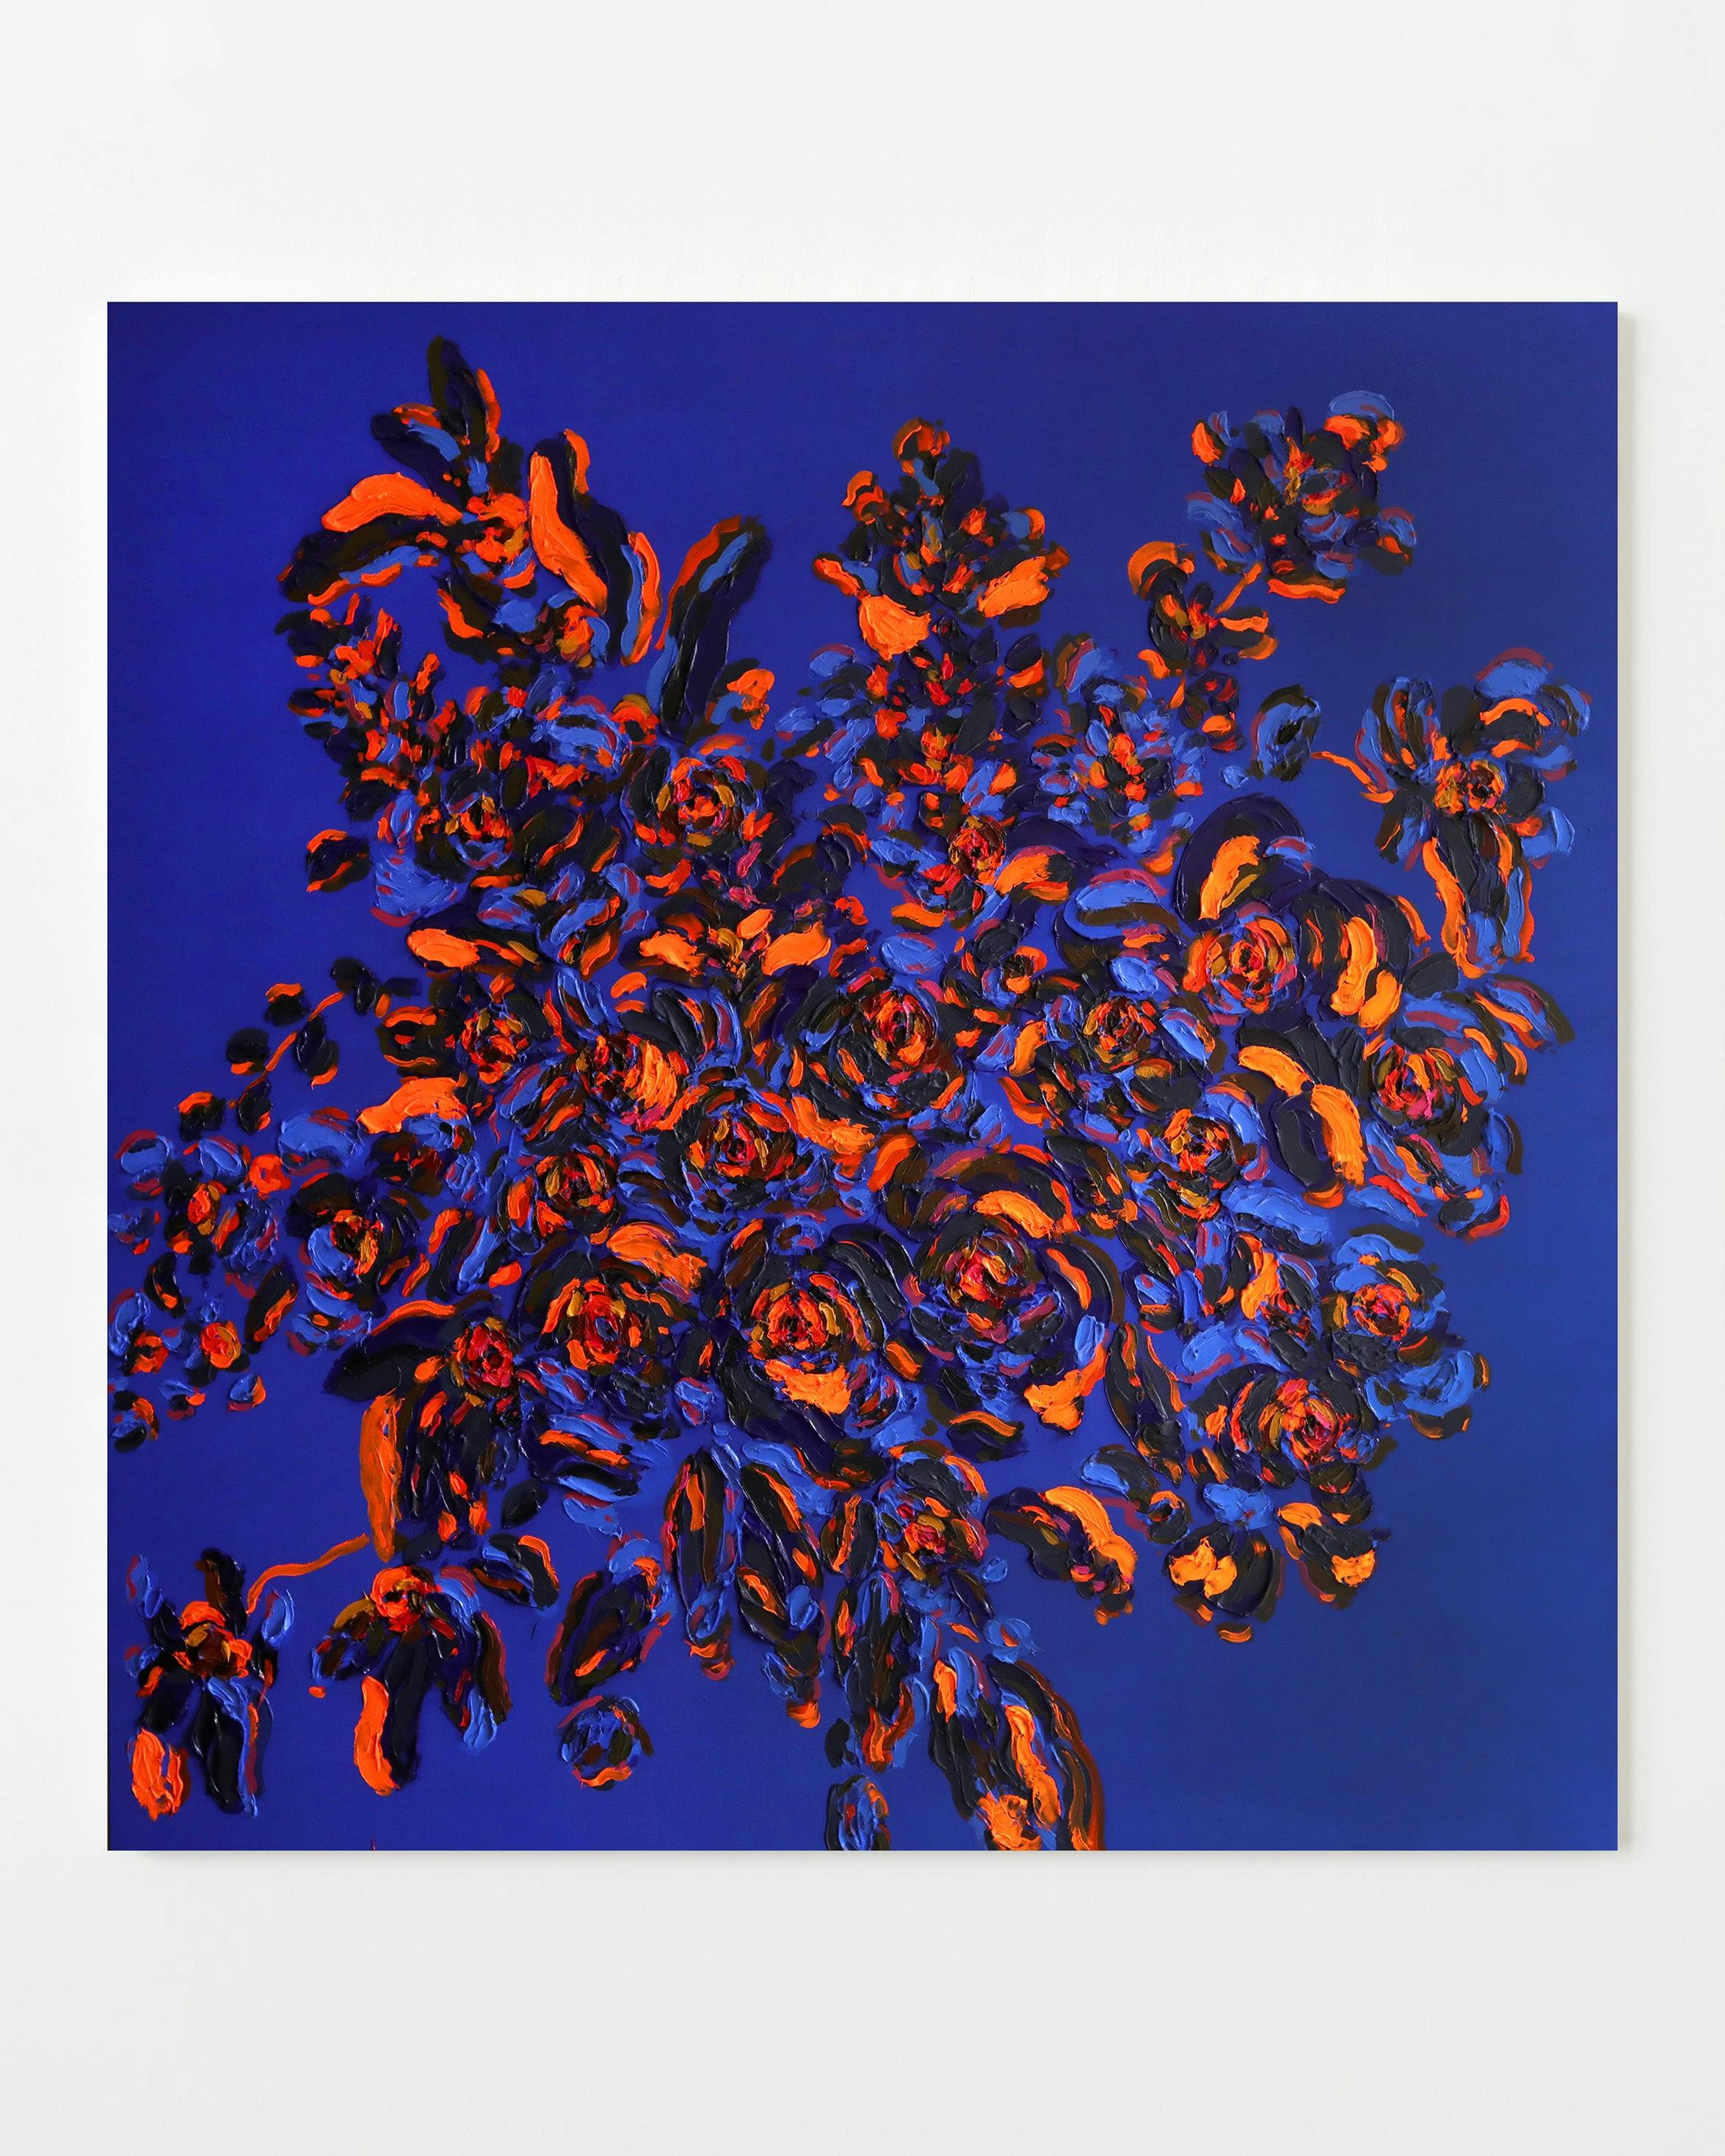 Painting by Erin Lynn Welsh titled "Botany Mono 48".